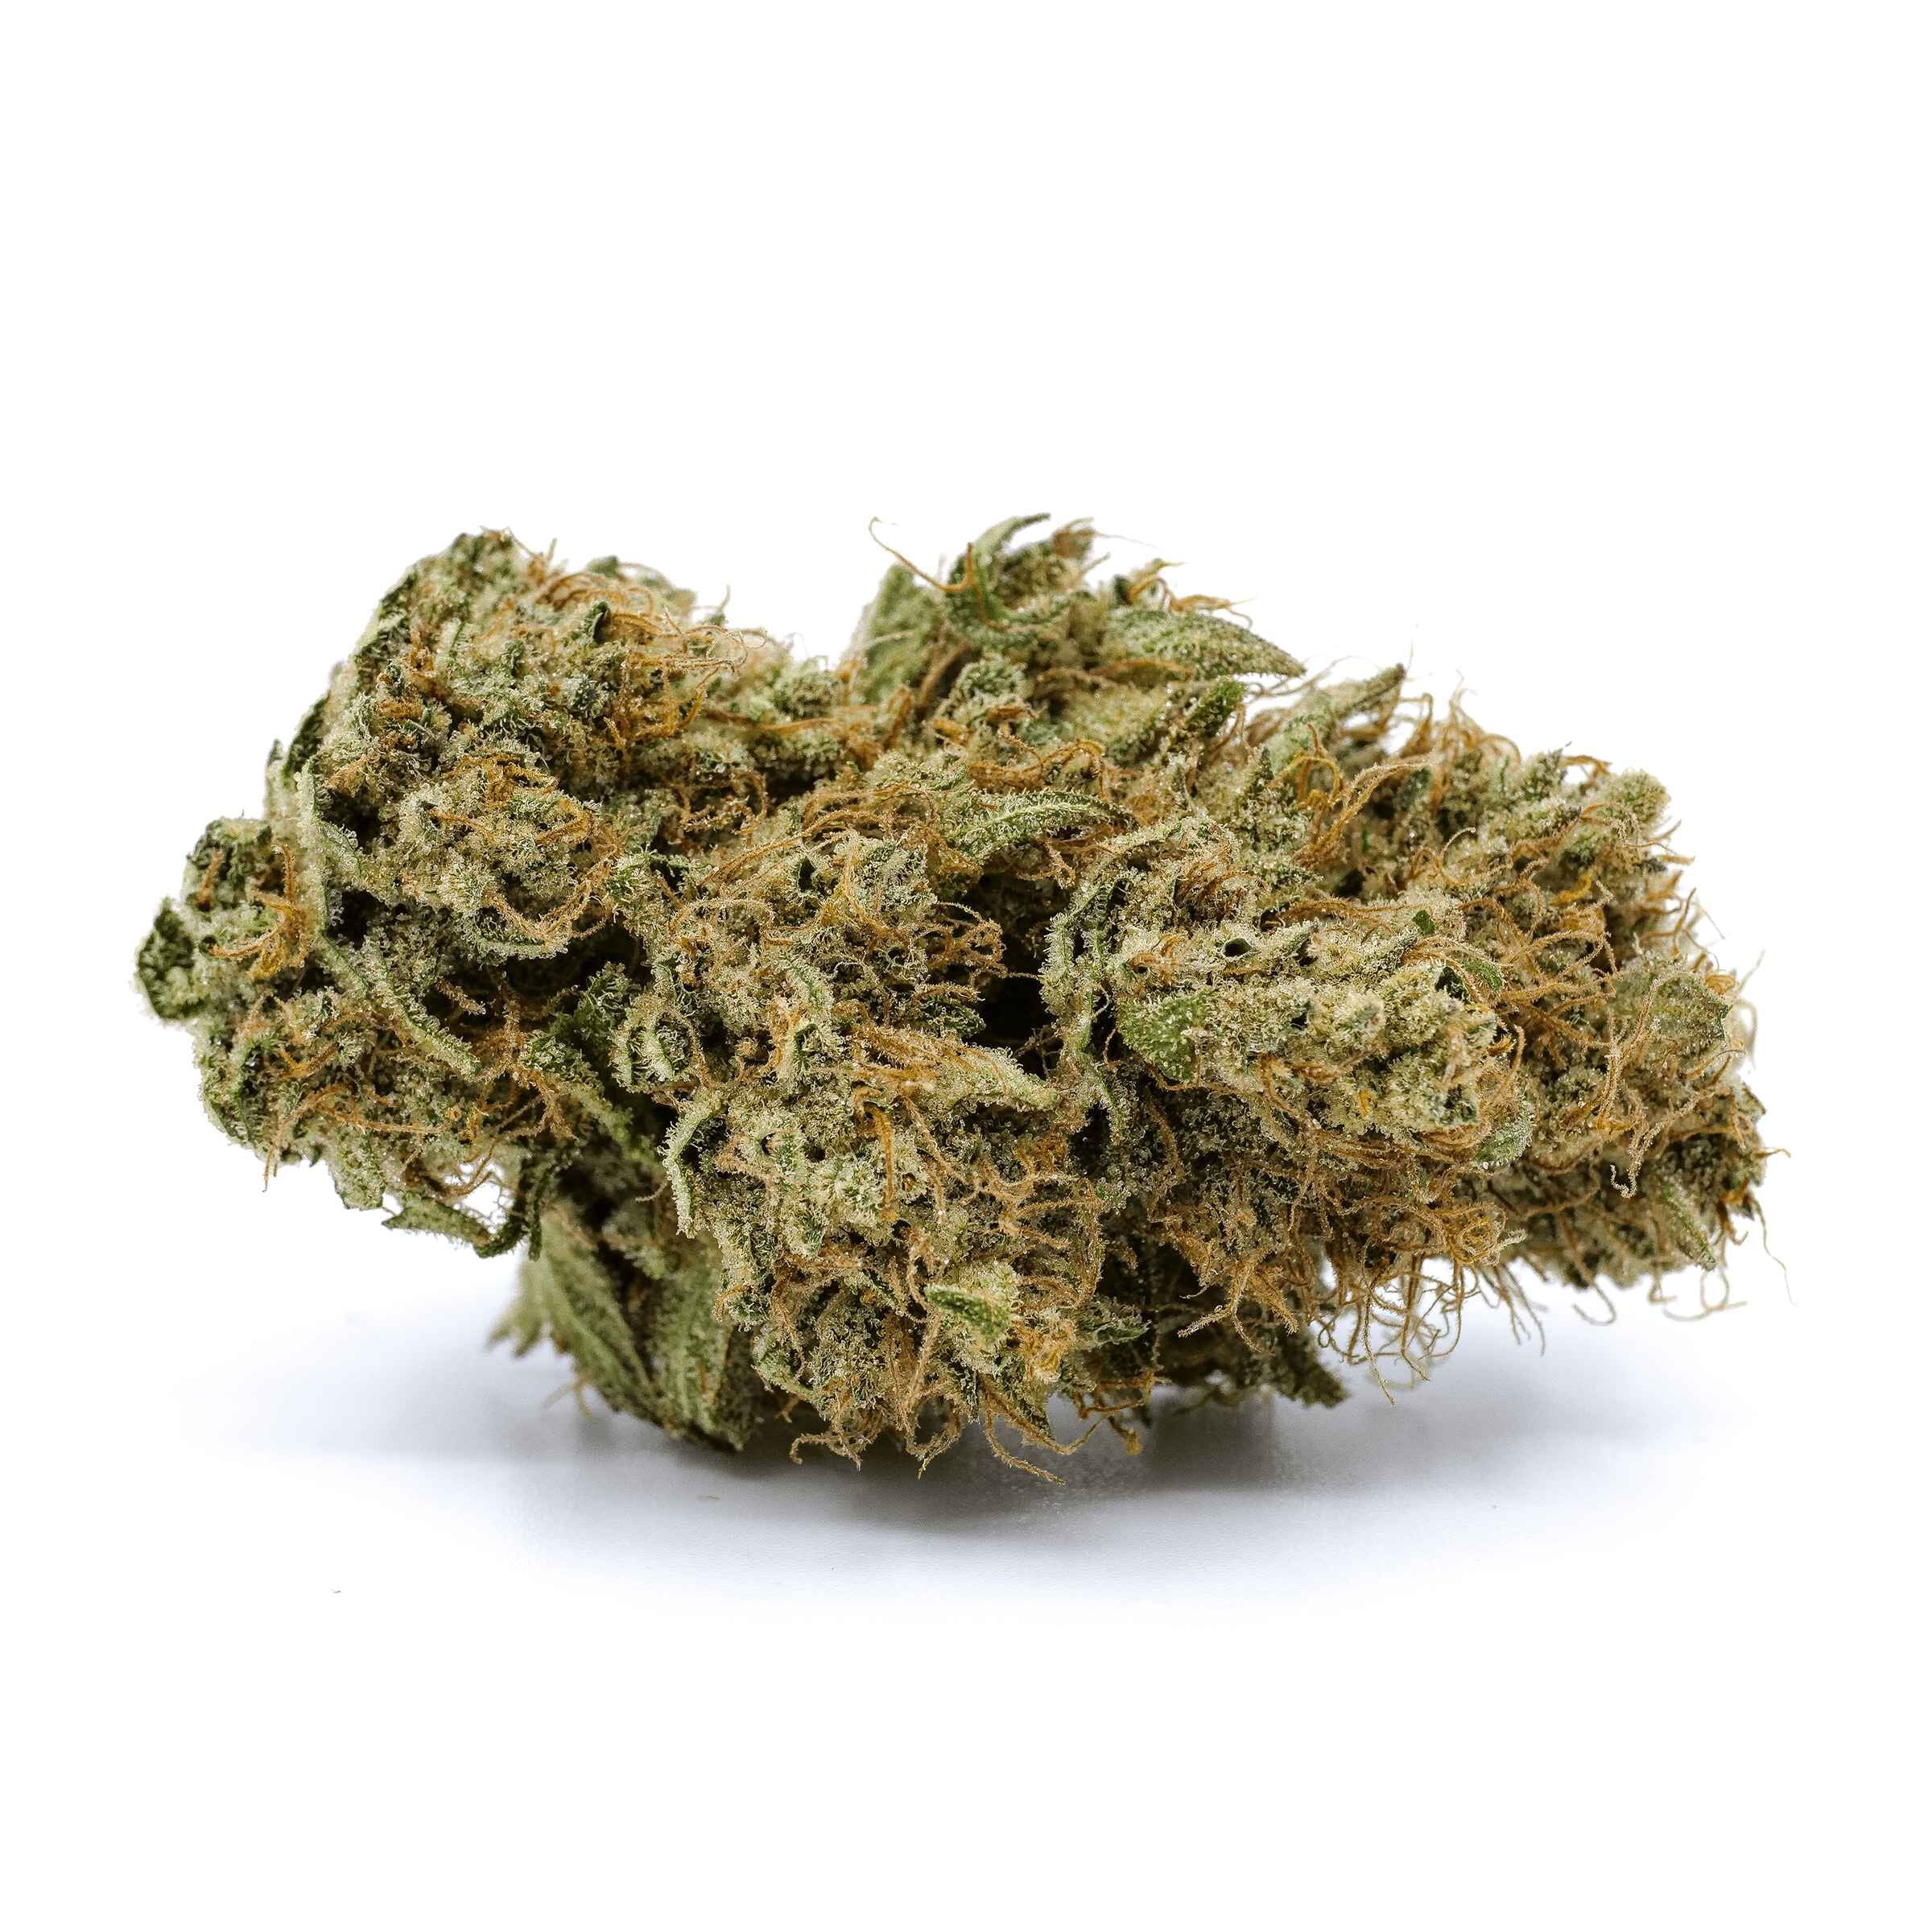 Cannabis Product Cold Creek Kush by Redecan